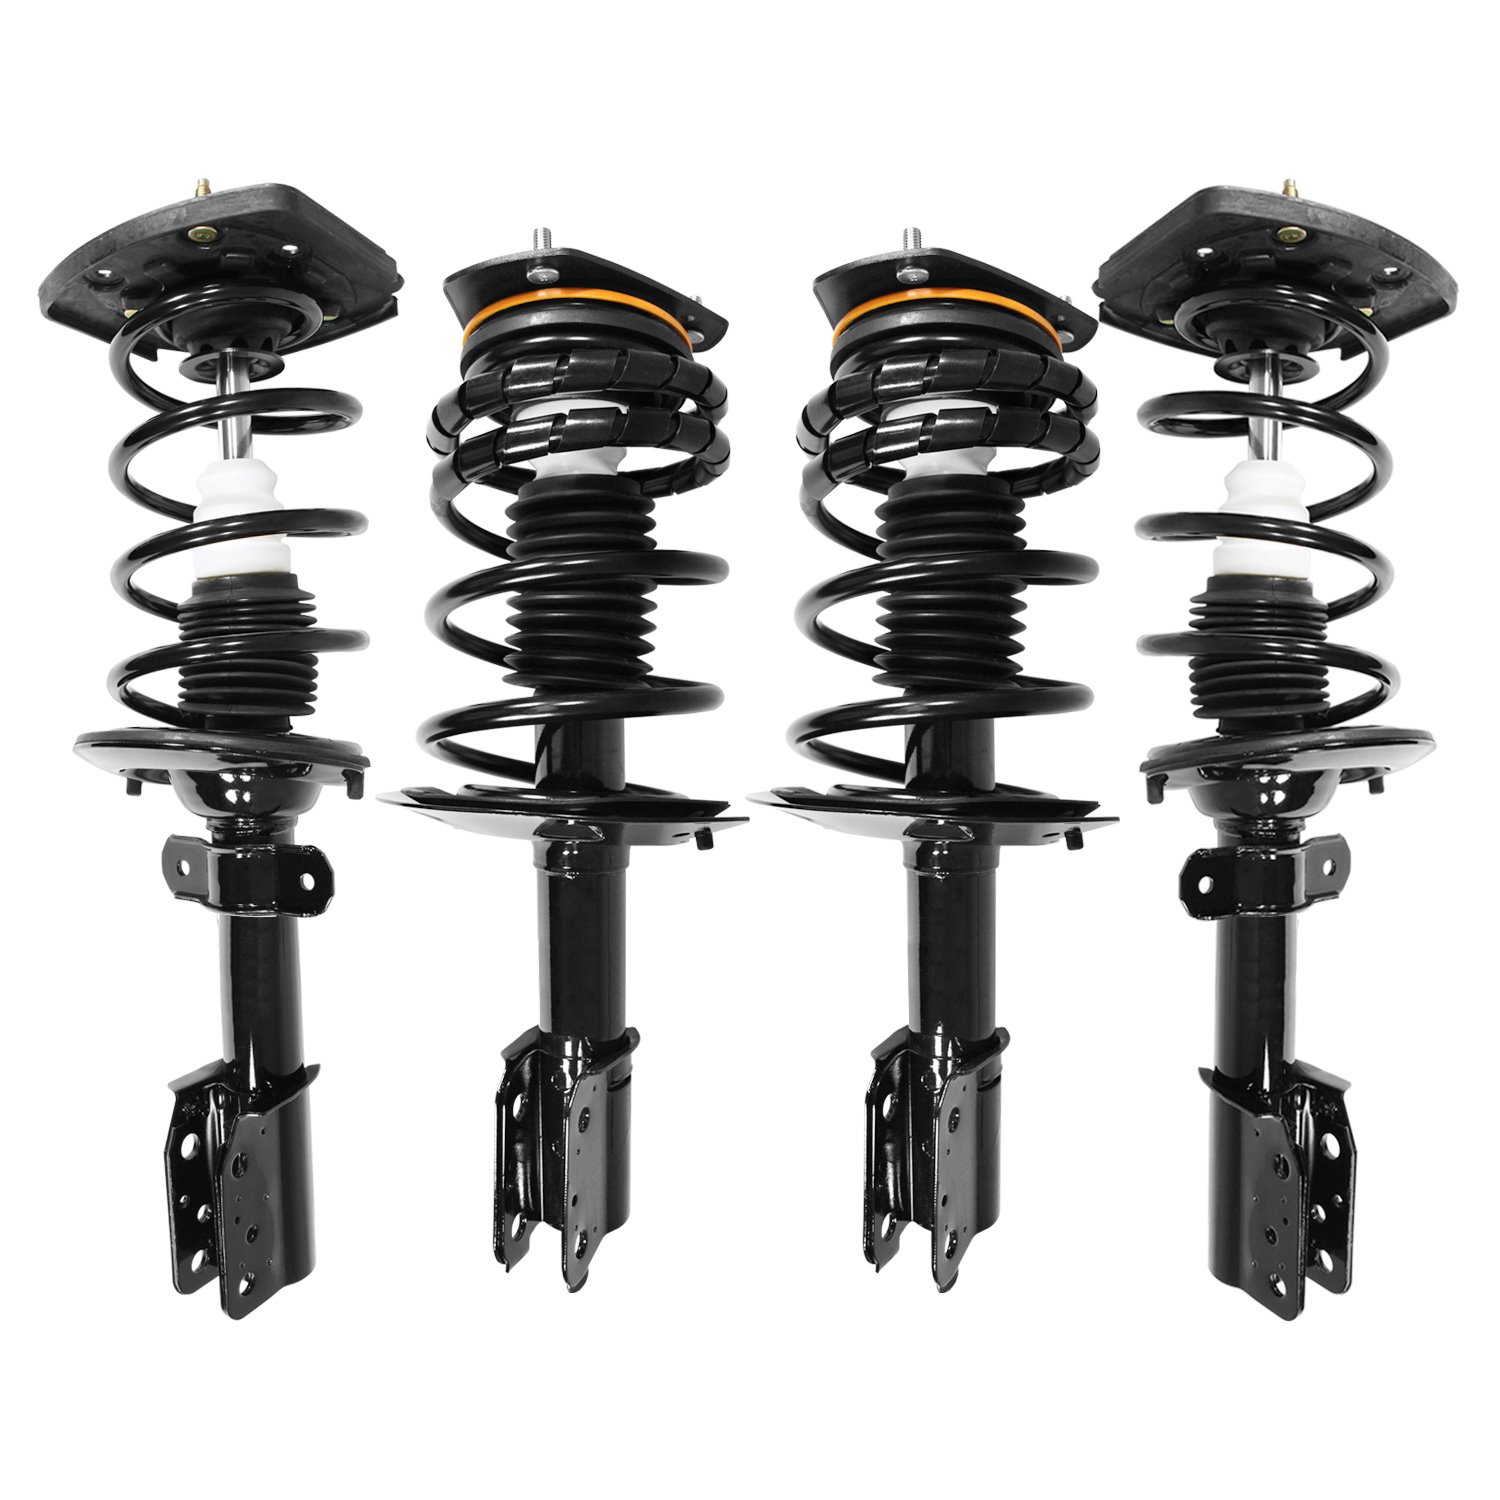 4-11020-15061-001 Front & Rear Suspension Strut & Coil Spring Assembly Kit Fits Select Chevy Impala, Chevy Monte Carlo